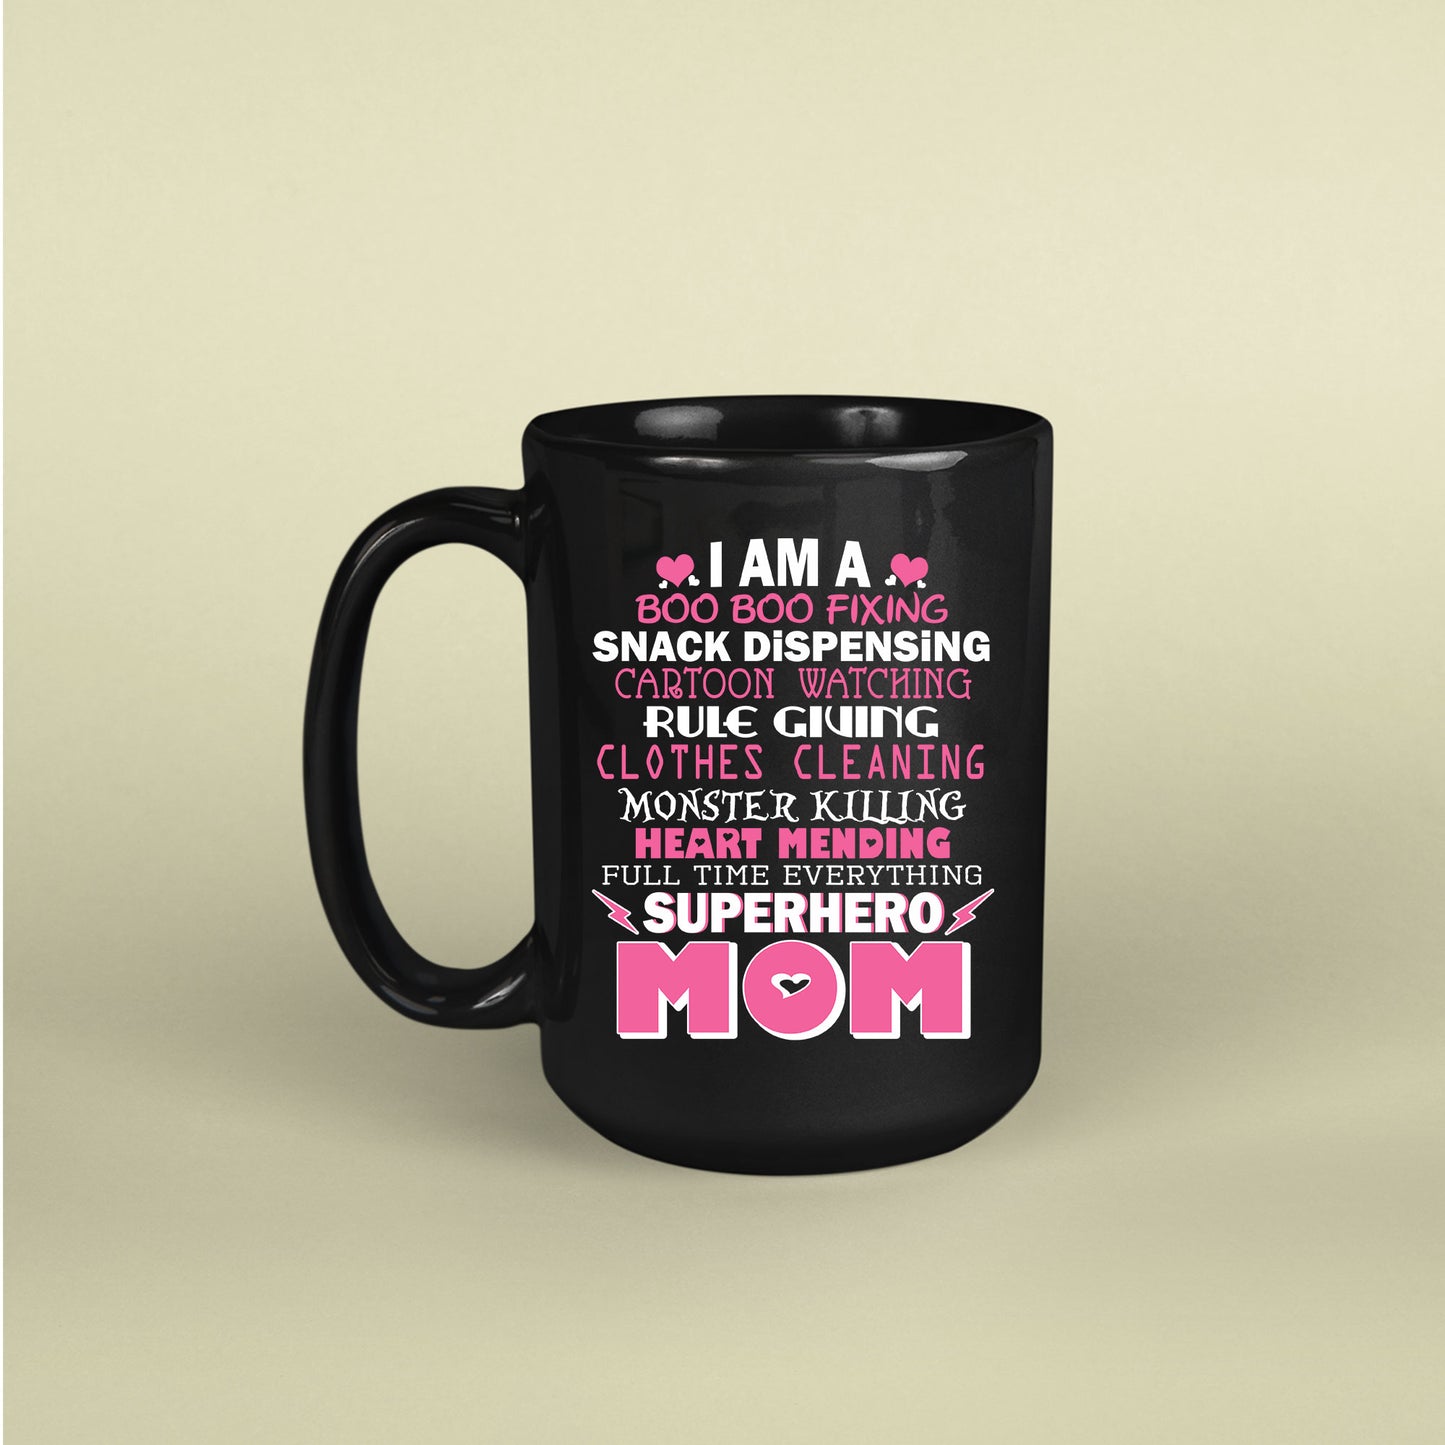 Mother's Day Superhero Mom Coffee Mug, Mom Quote Mug, For Mom And Mother In Law, Present For Mother Day, Mothers Day Gifts In Law